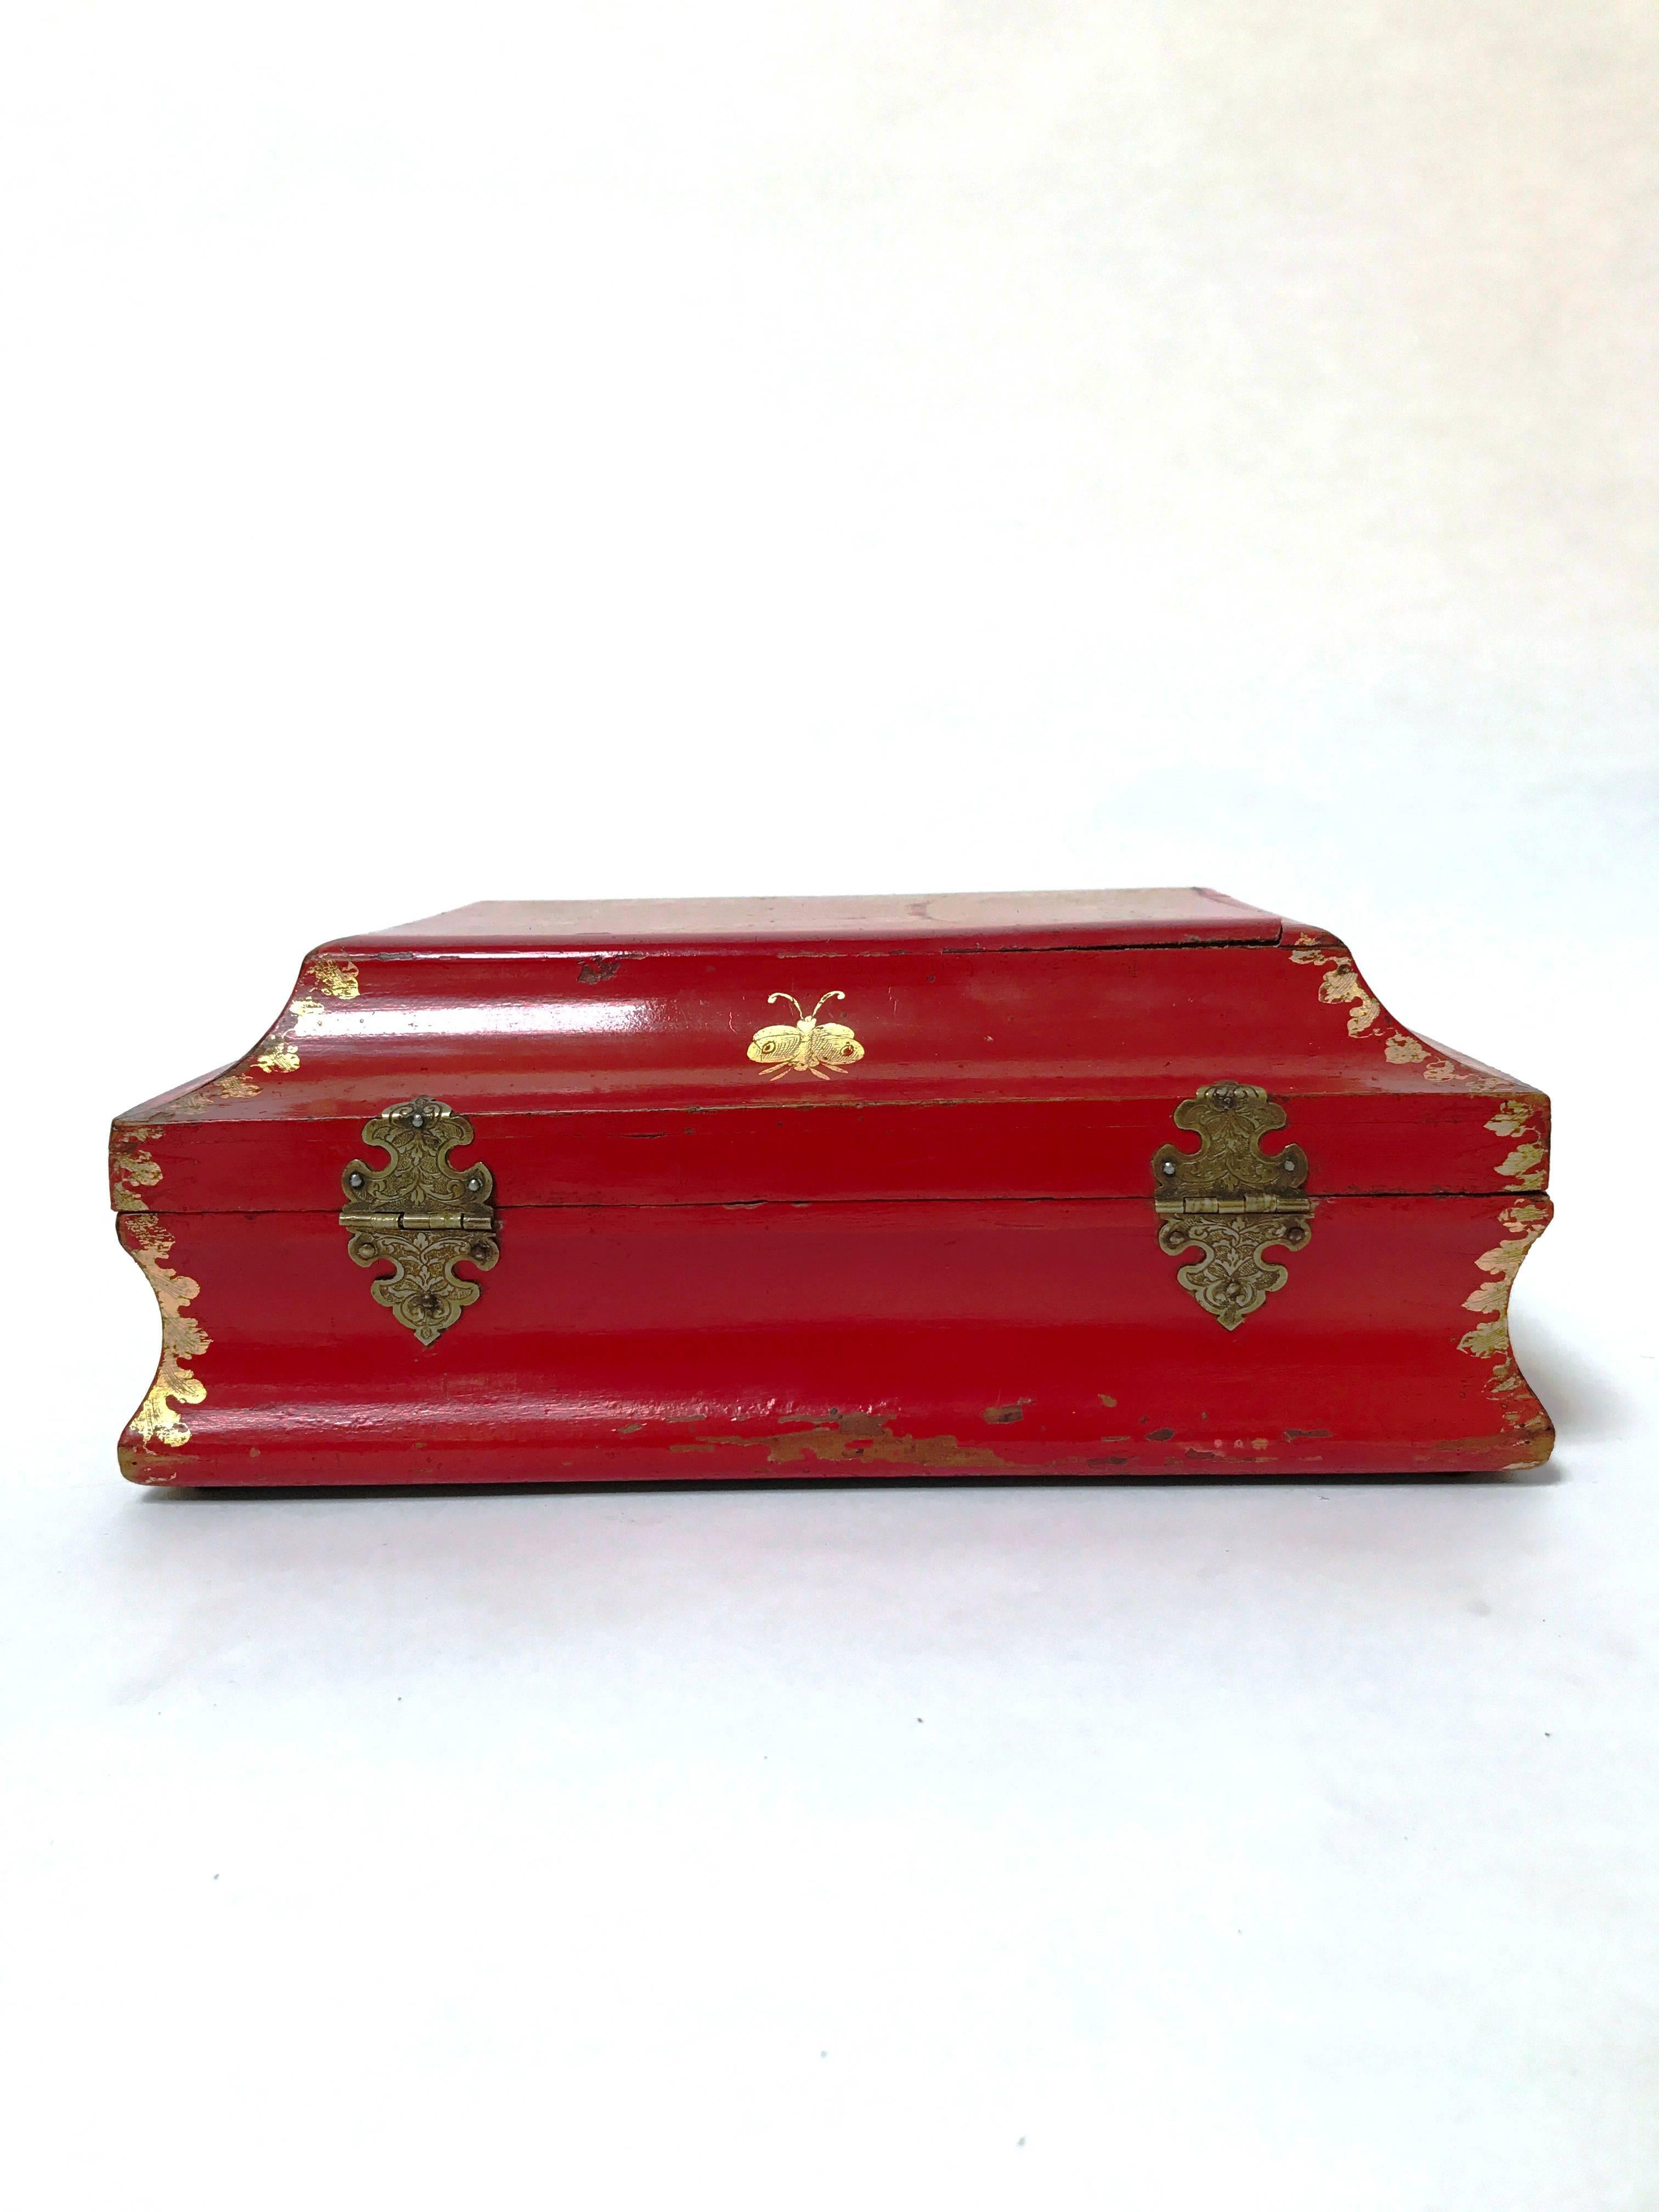 A beautiful and rare 18th century period Louis XV chinoiserie red and gold lacquered wig box with flower, garden and bee motifs, France, circa 1750.